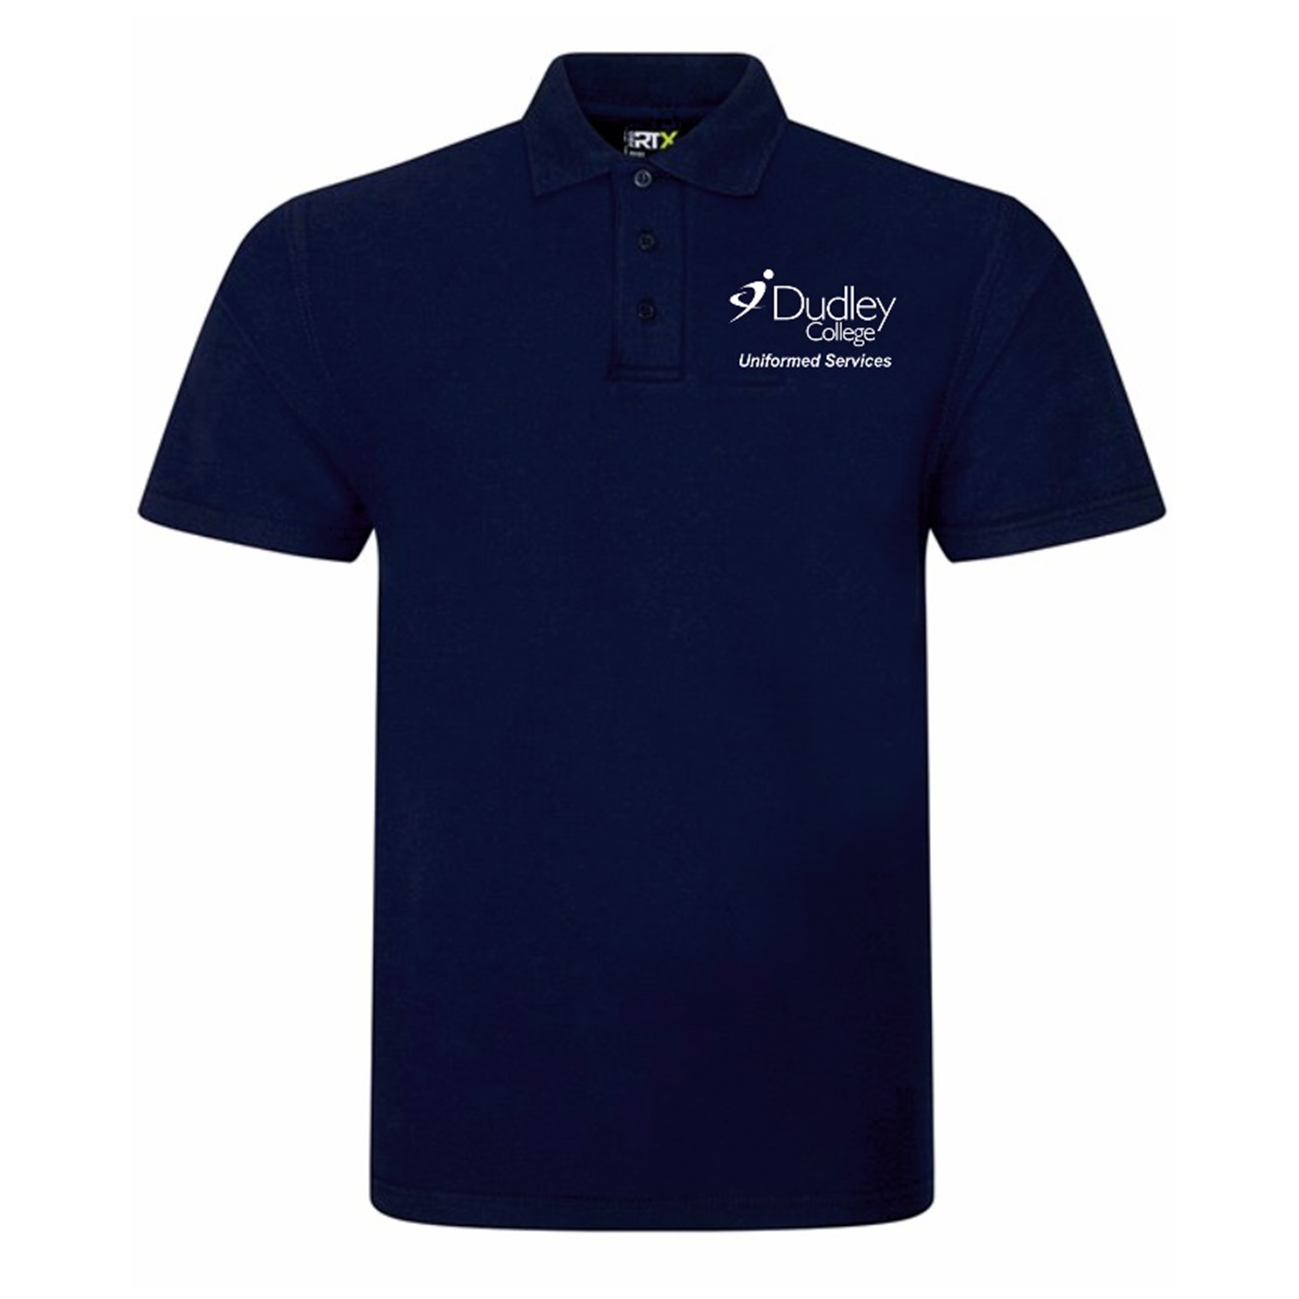 Dudley College Uniformed Services - Polo Shirt [RX101]